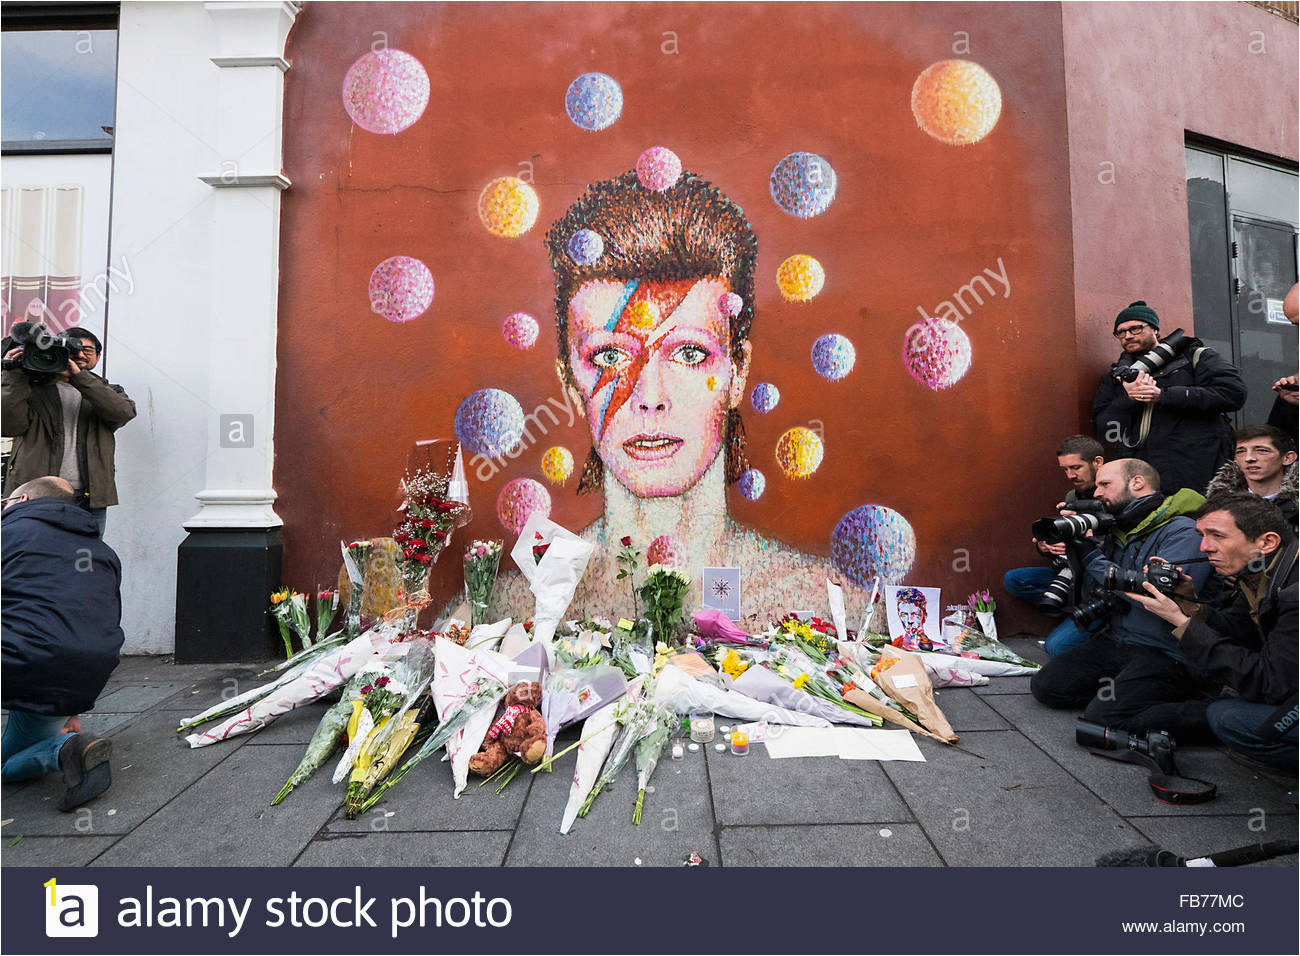 a mural of david bowie with tributes and flowers FB77MC